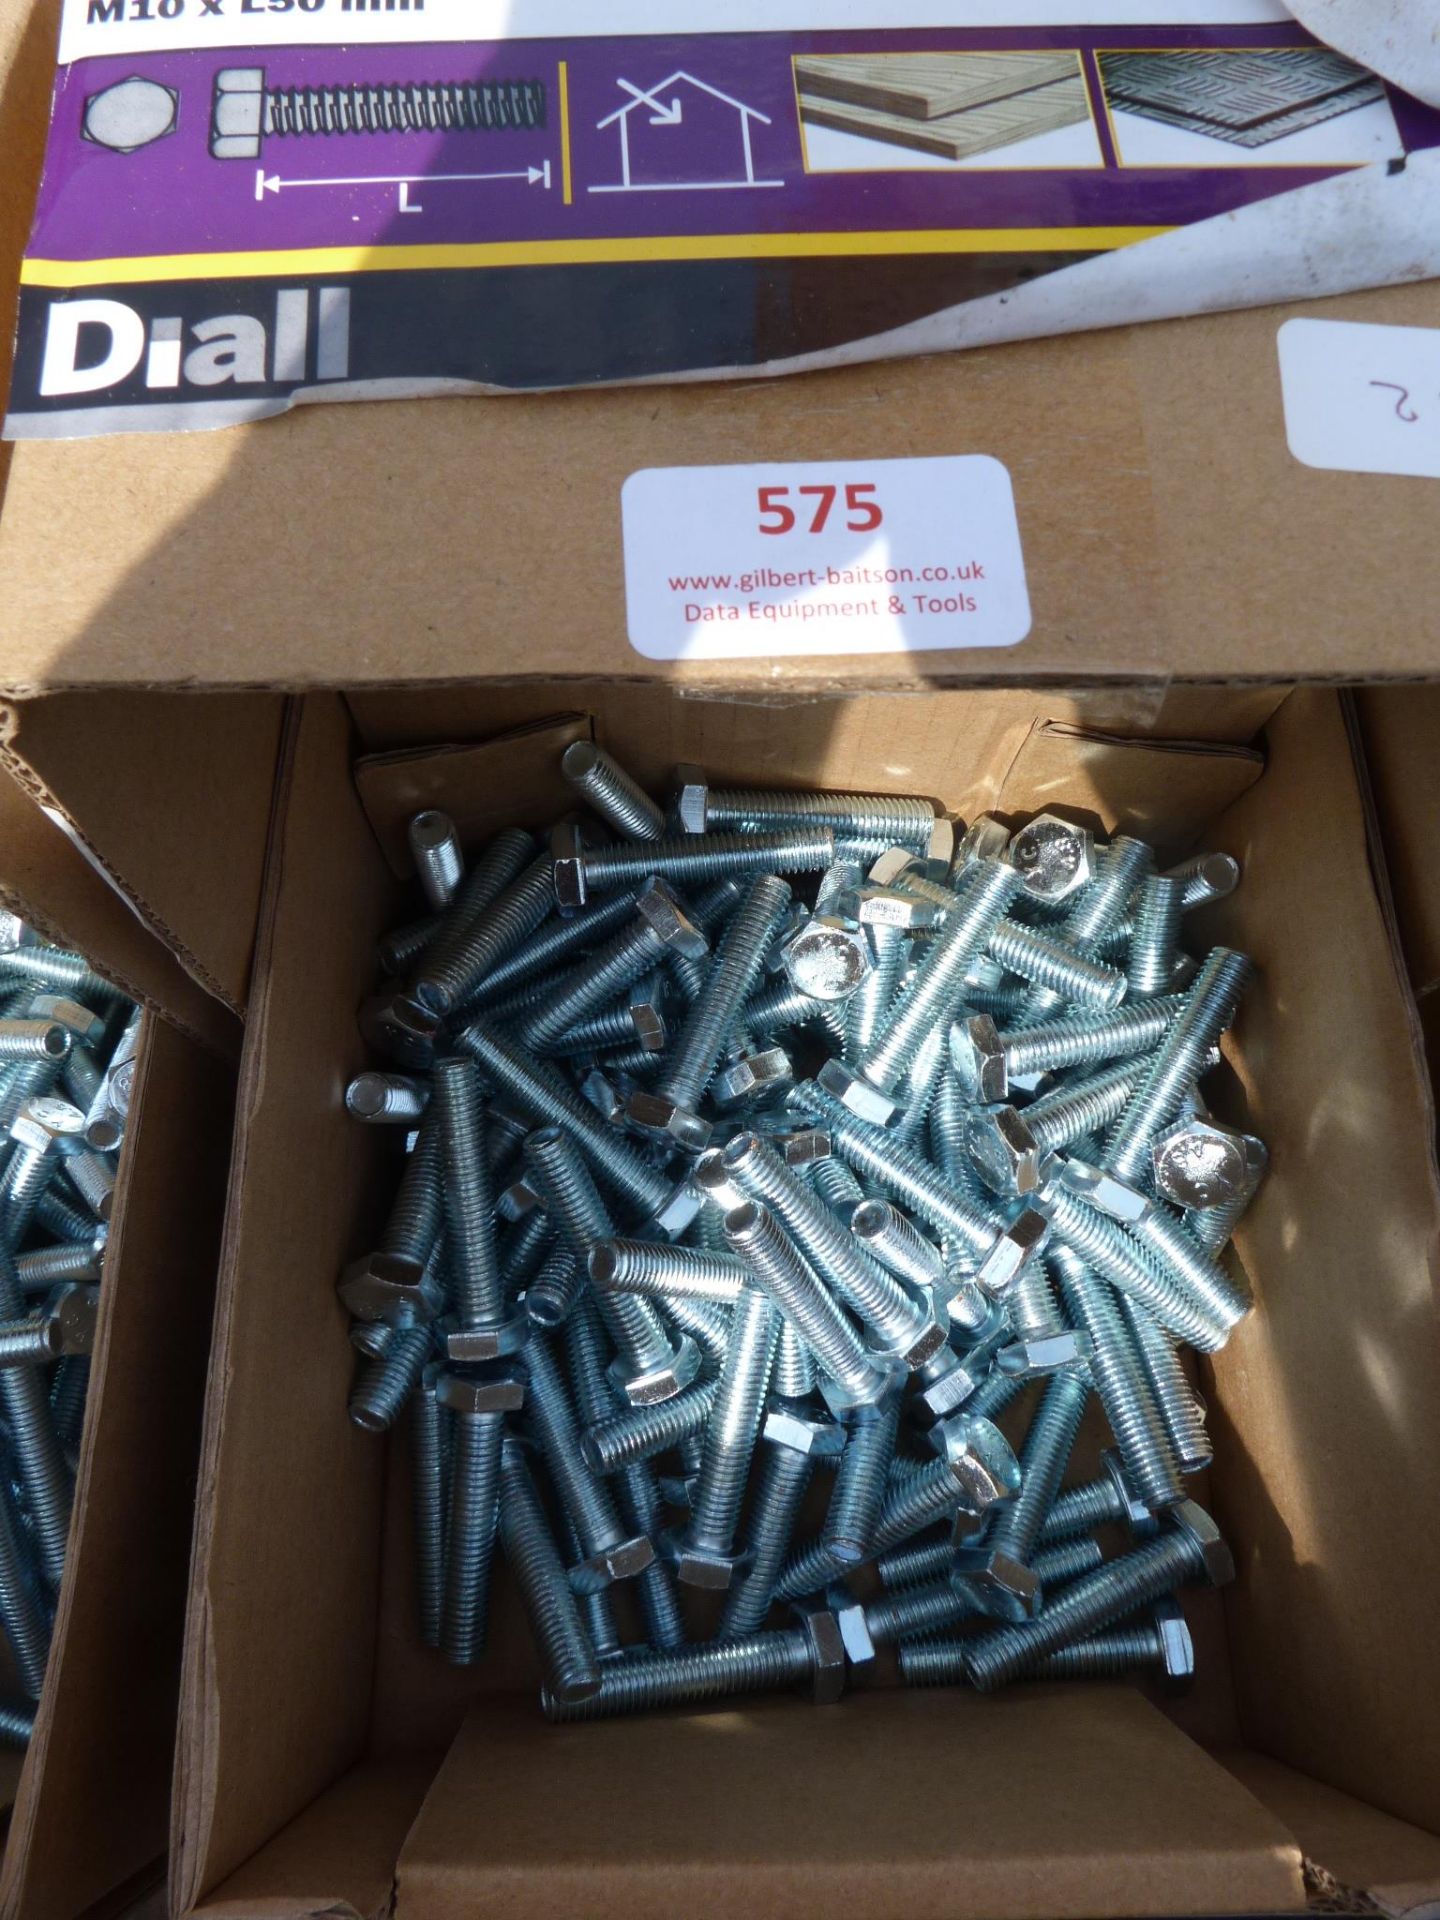 4kg of M10xL50mm Diall Hex Bolts